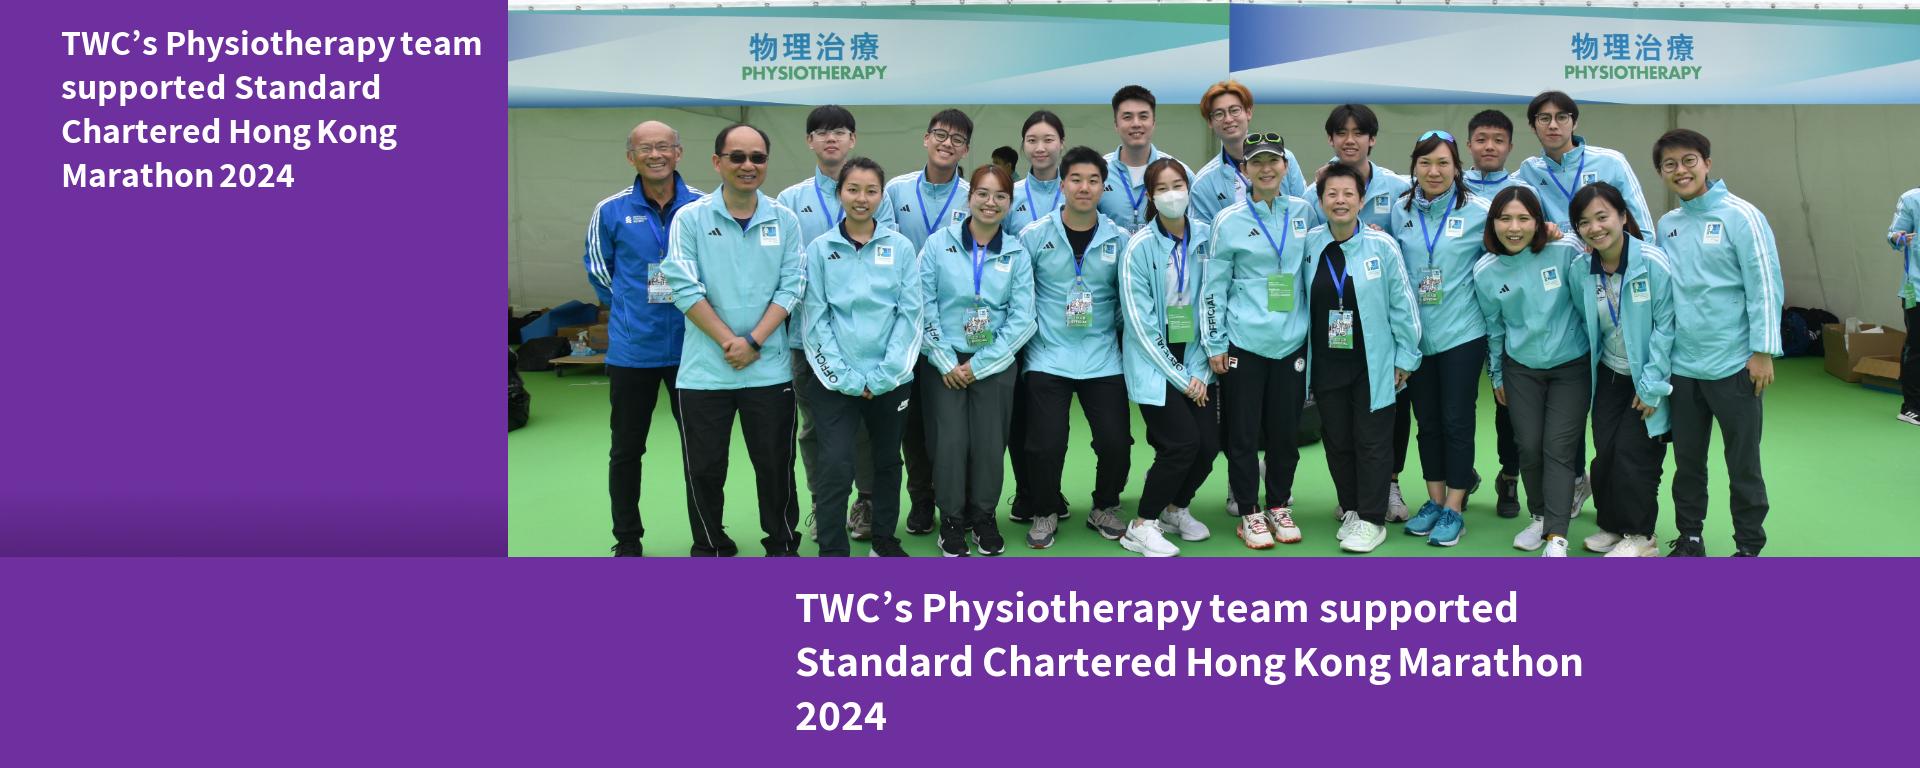 TWC’s Physiotherapy team supported Standard Chartered Hong Kong Marathon 2024